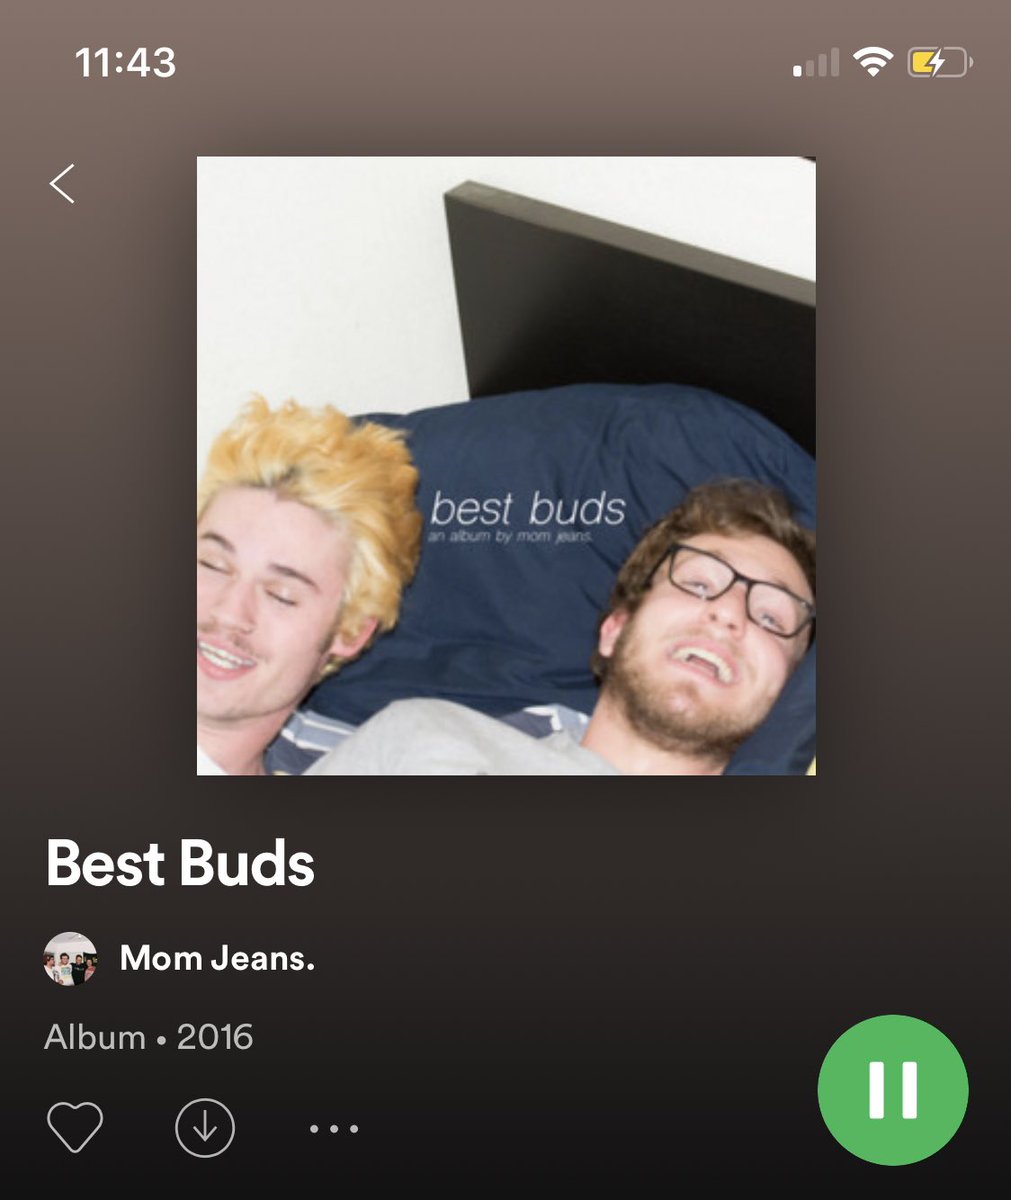 best buds fav song: *sobs quietly*